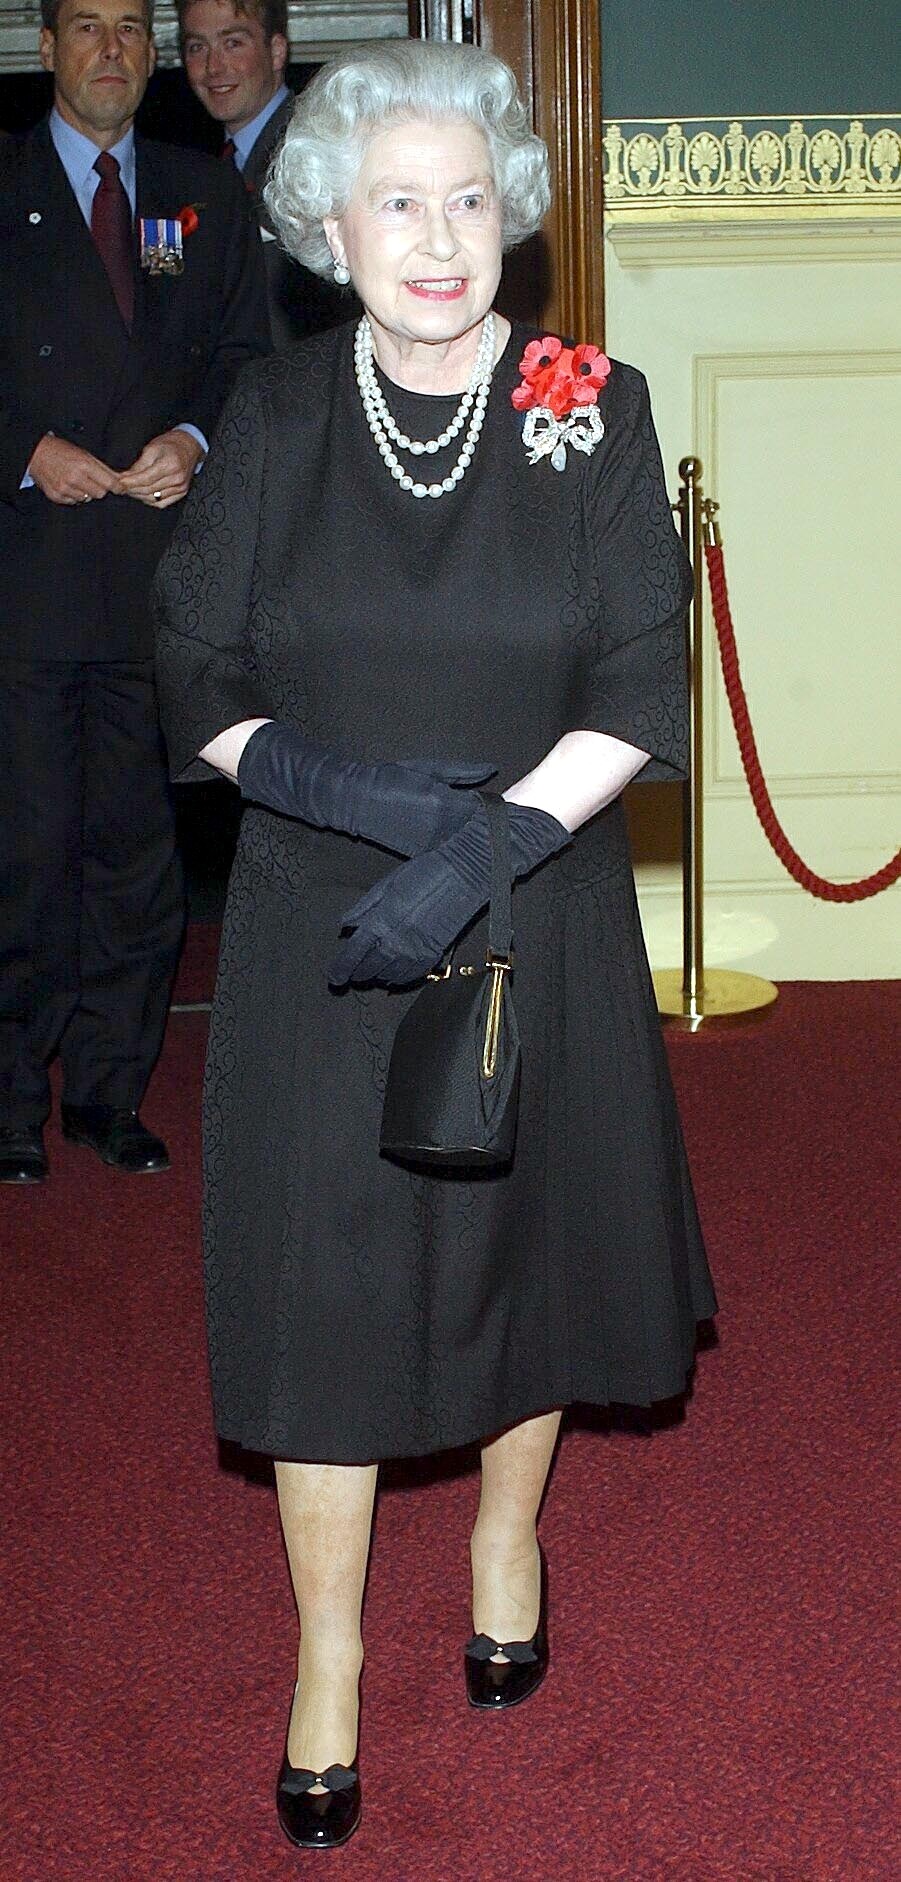 The Queen at The Royal Albert Hall